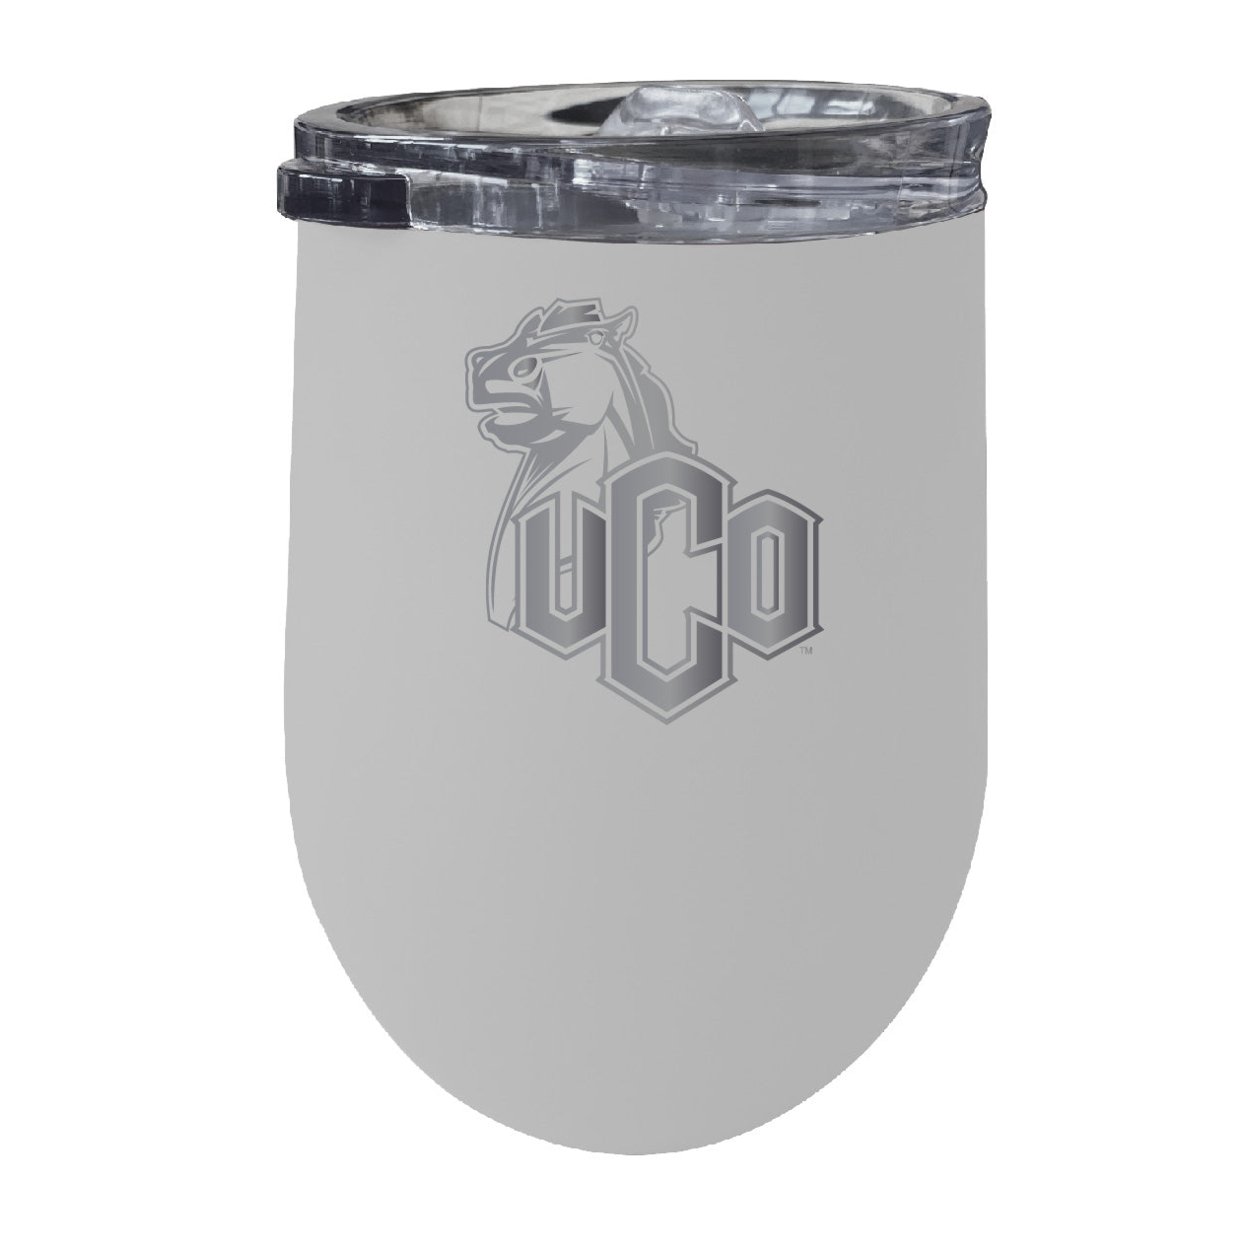 University Of Central Oklahoma Bronchos 12 Oz Etched Insulated Wine Stainless Steel Tumbler - Choose Your Color - Black